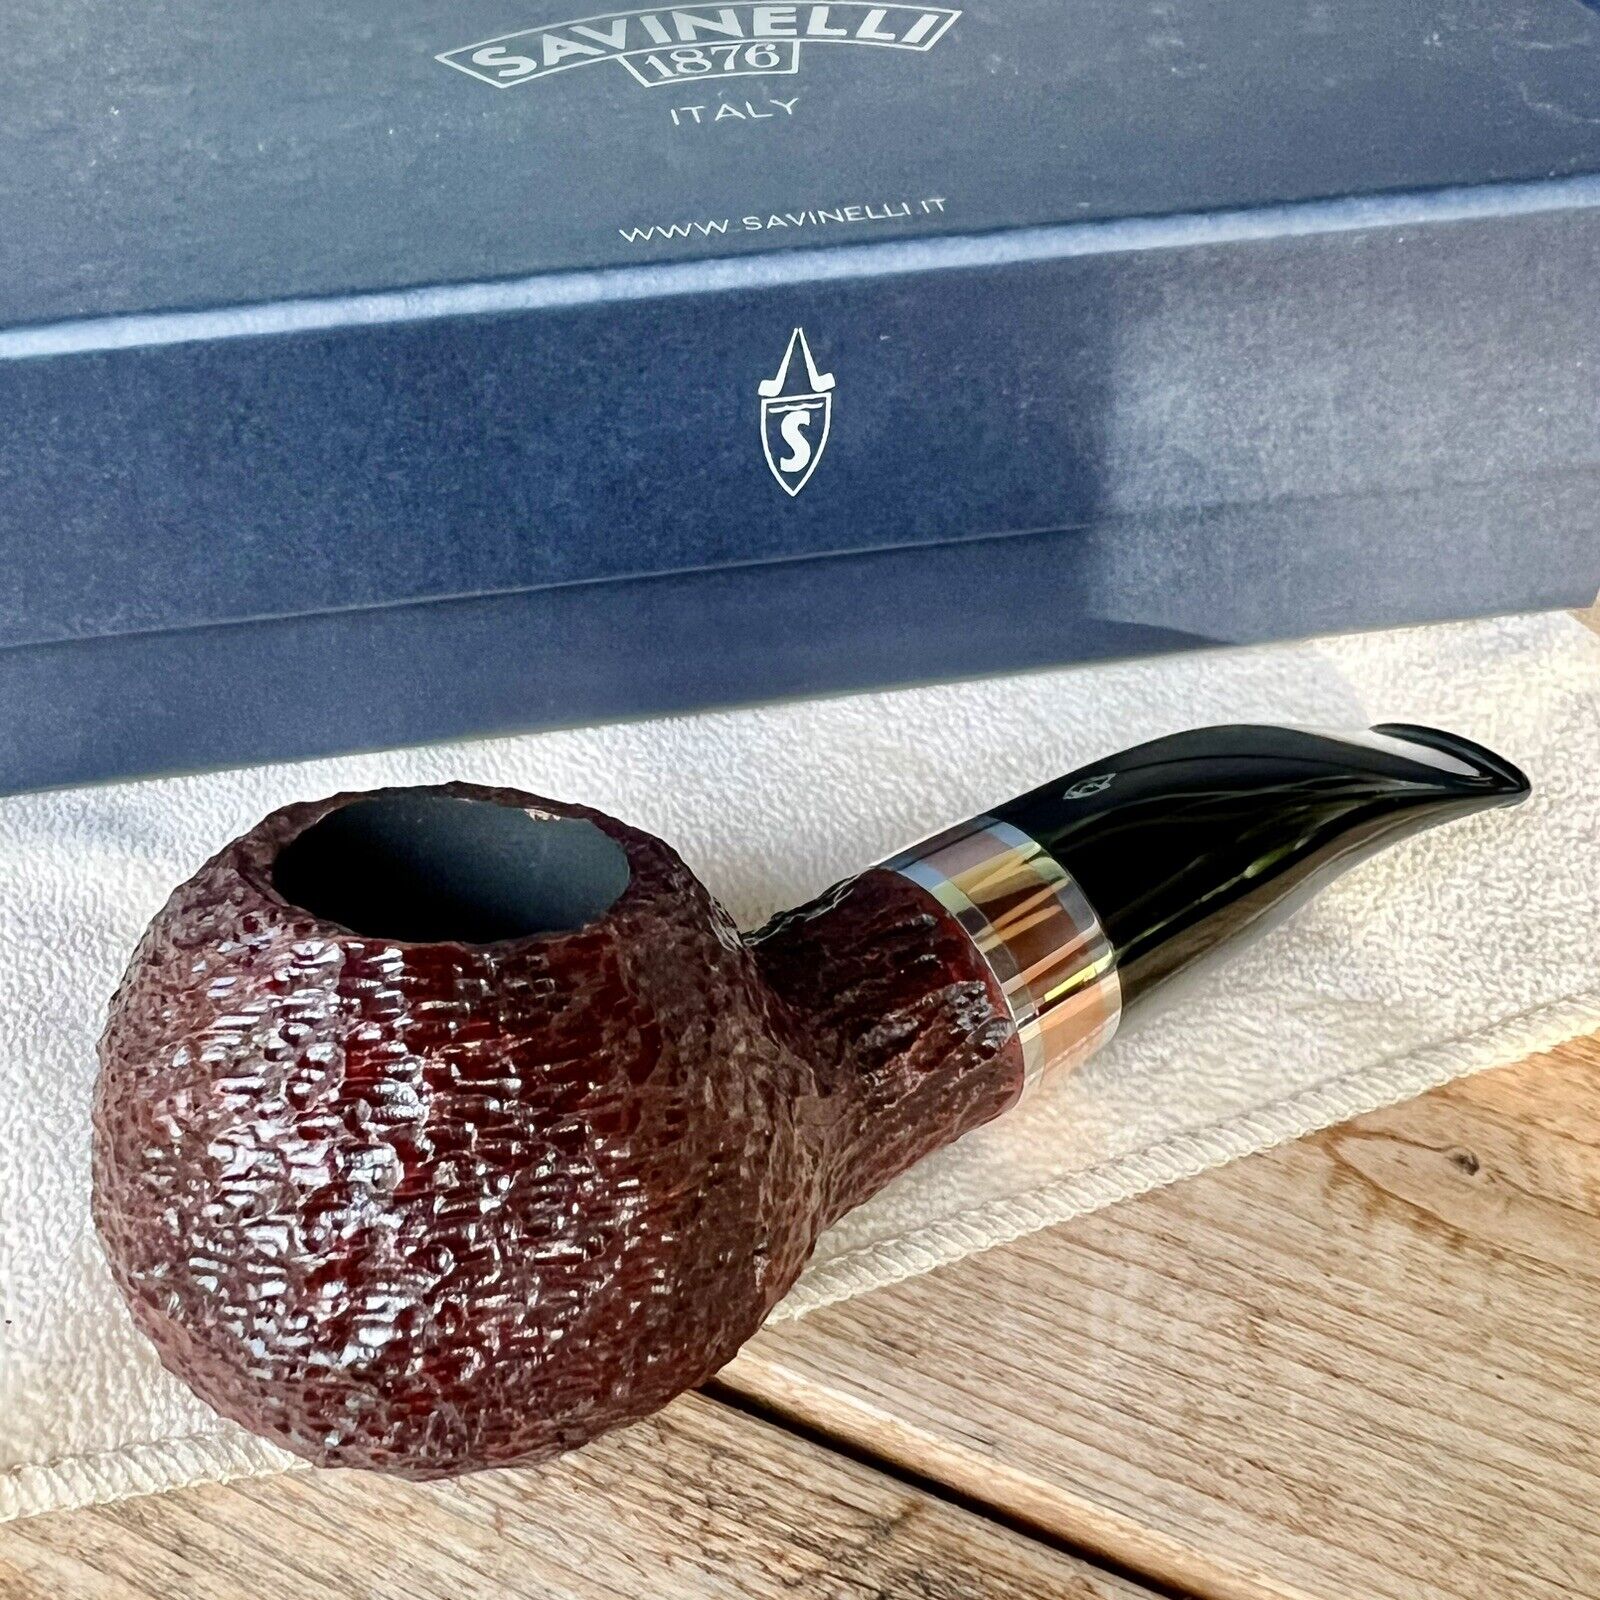 Savinelli Marte Rusticated Author (320 KS) 6mm Filter Tobacco Pipe - NEW